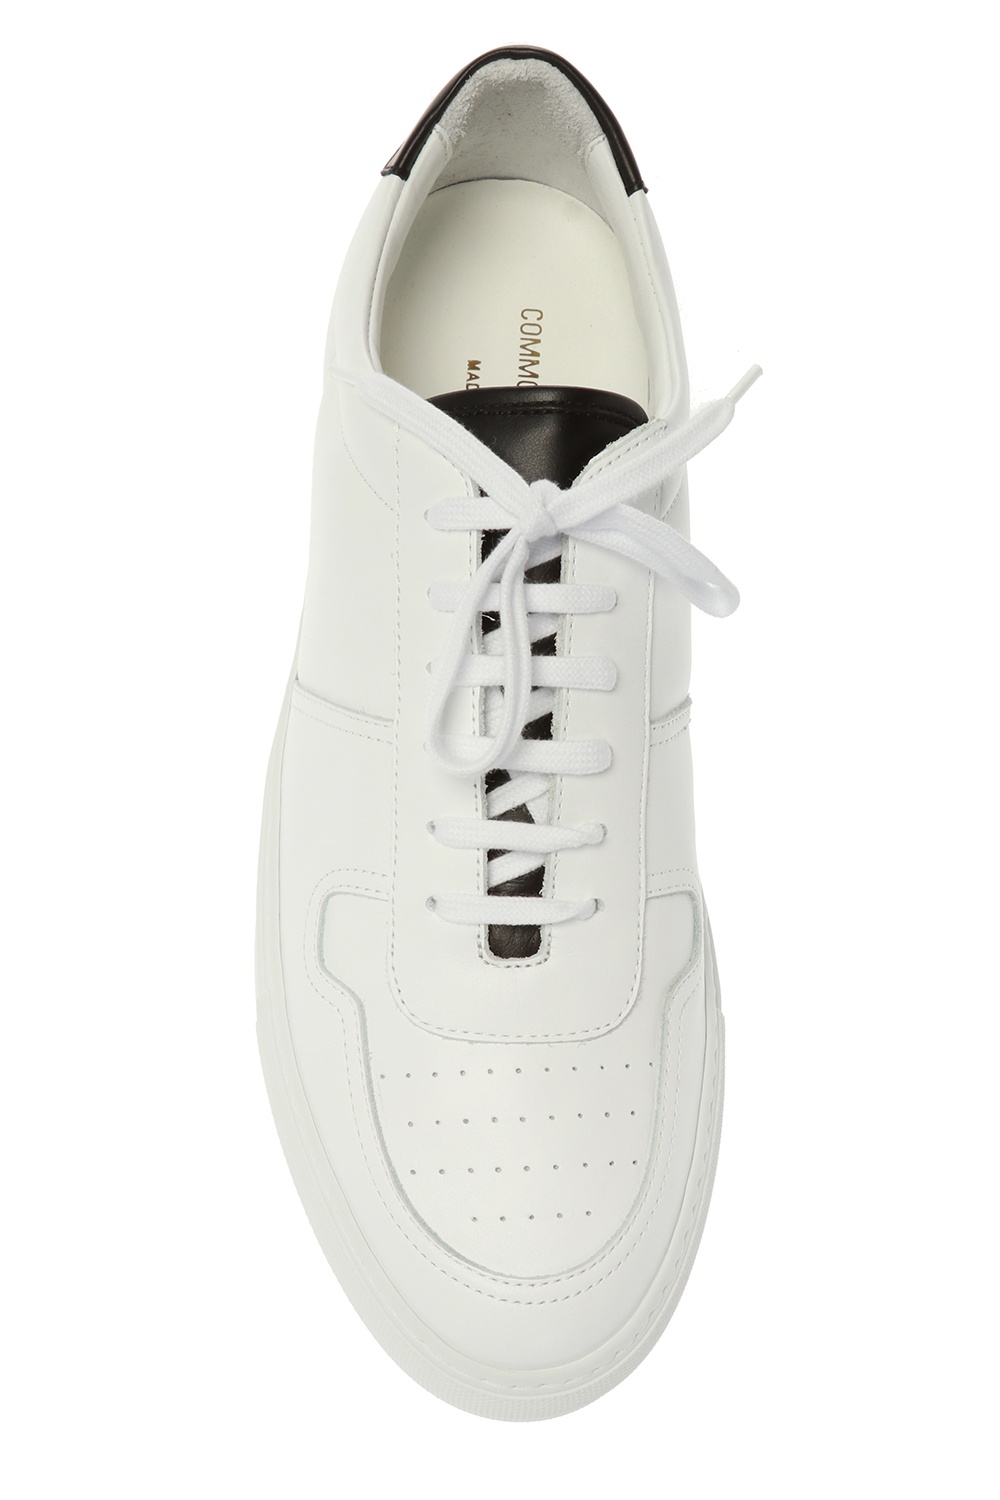 Bball Sneakers Common Projects Vitkac Singapore